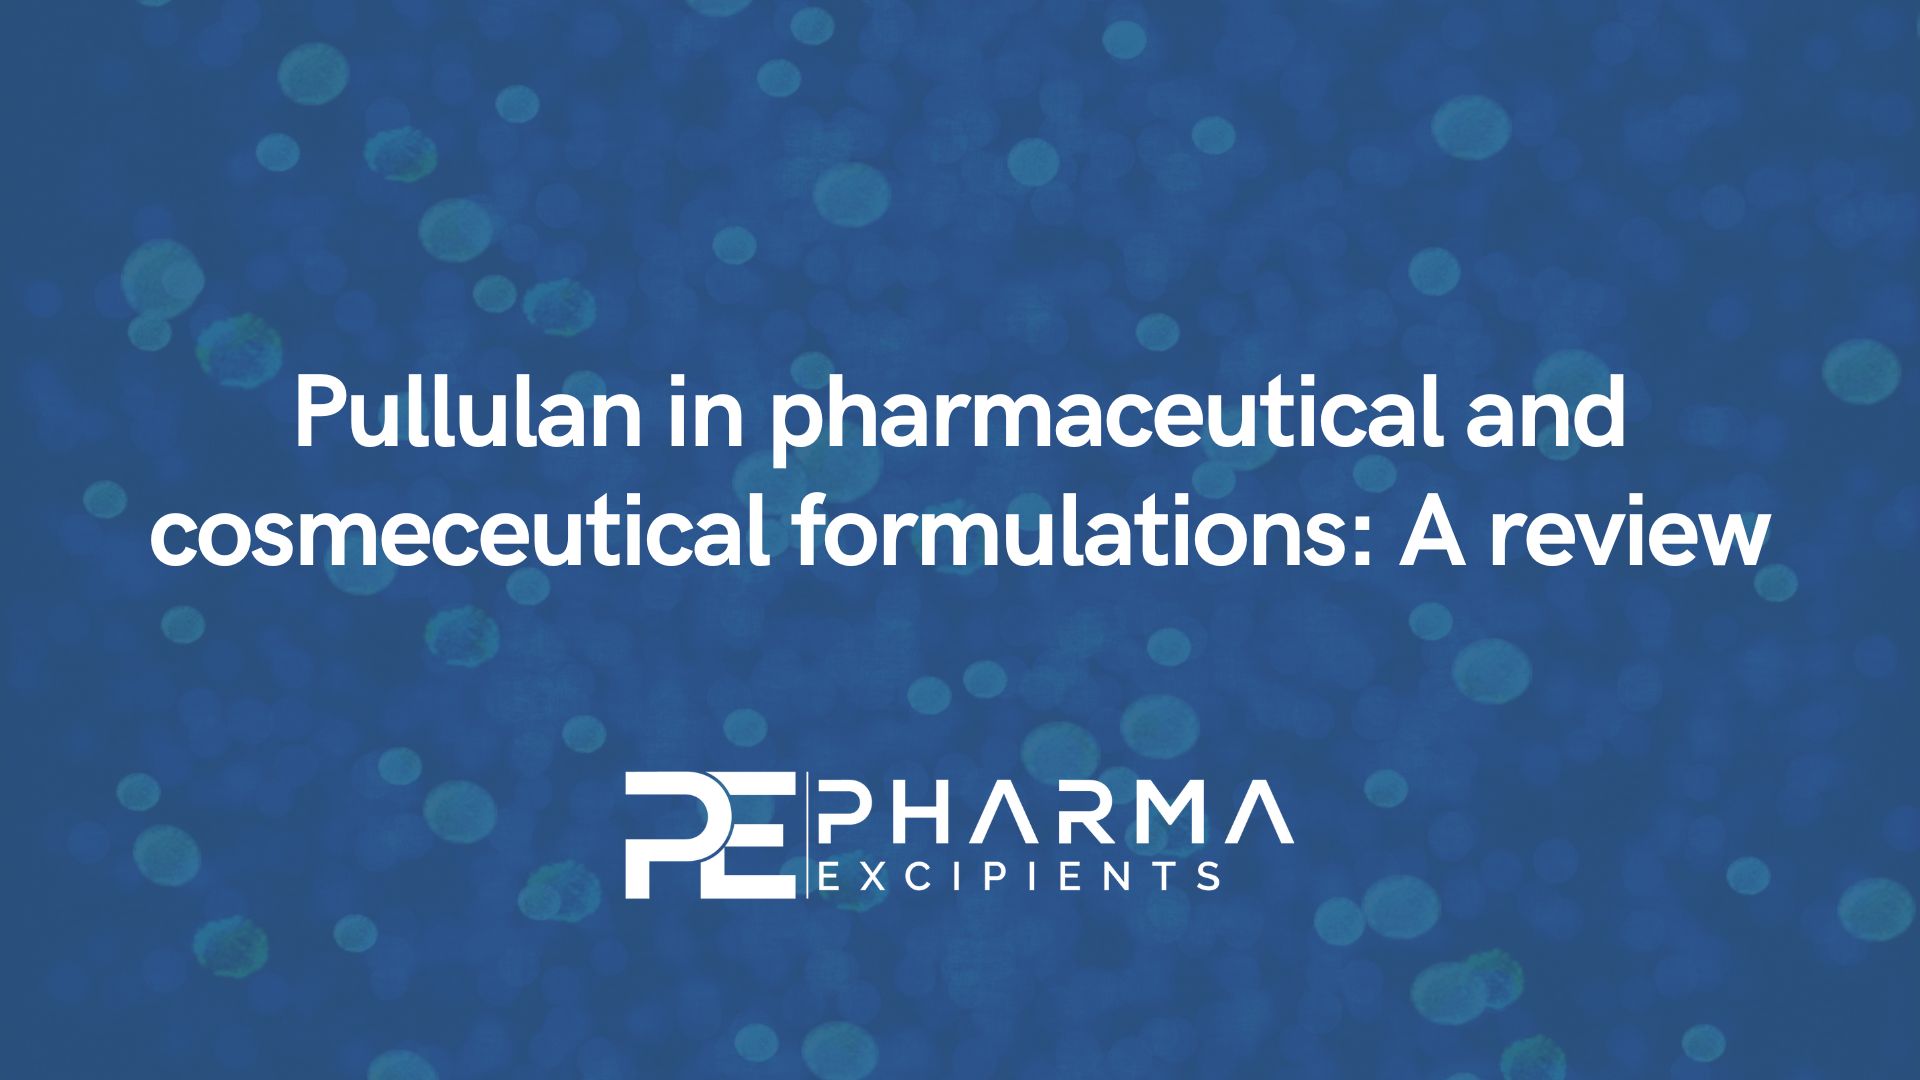 Pullulan in pharmaceutical and cosmeceutical formulations: A review